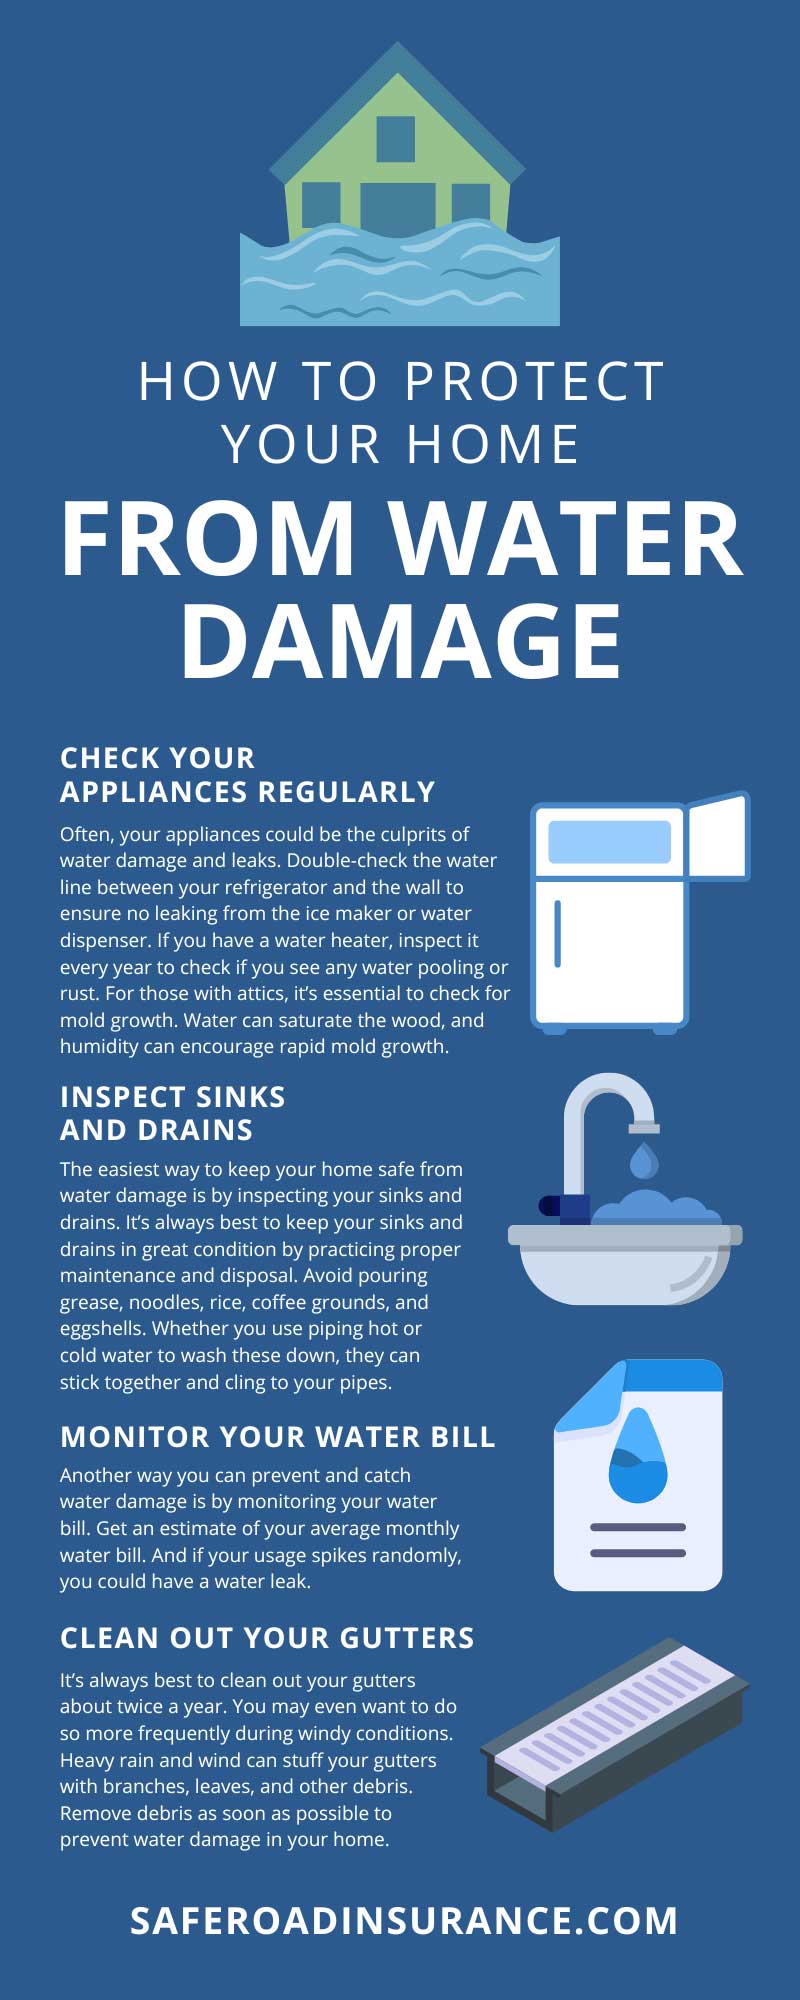 How To Protect Your Home From Water Damage